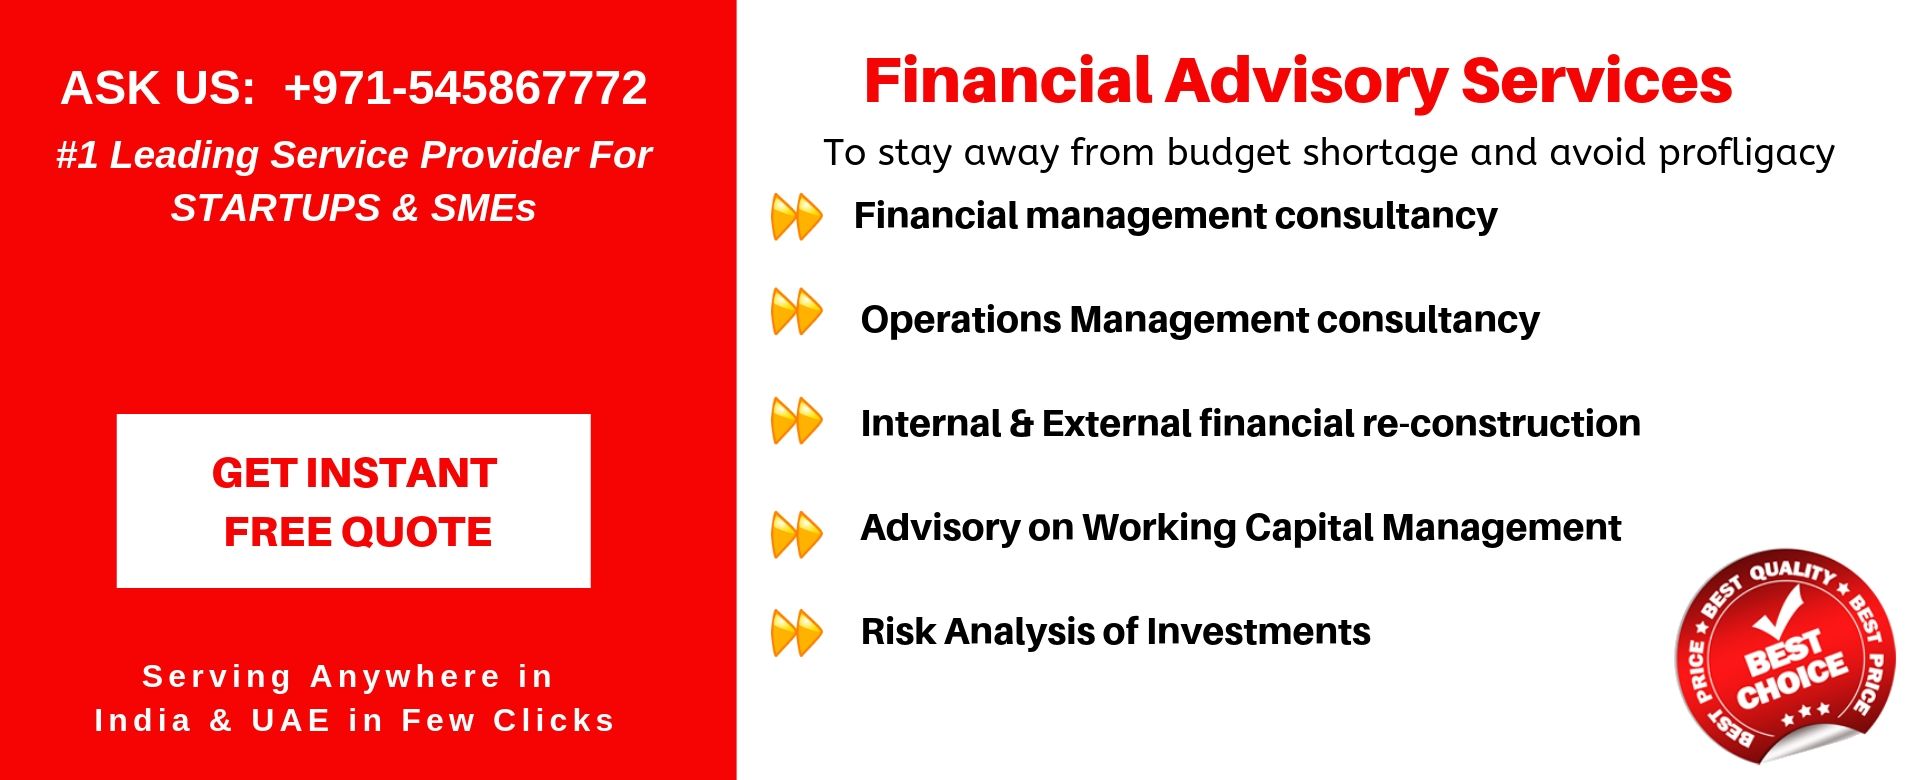 financial advisory services in uae